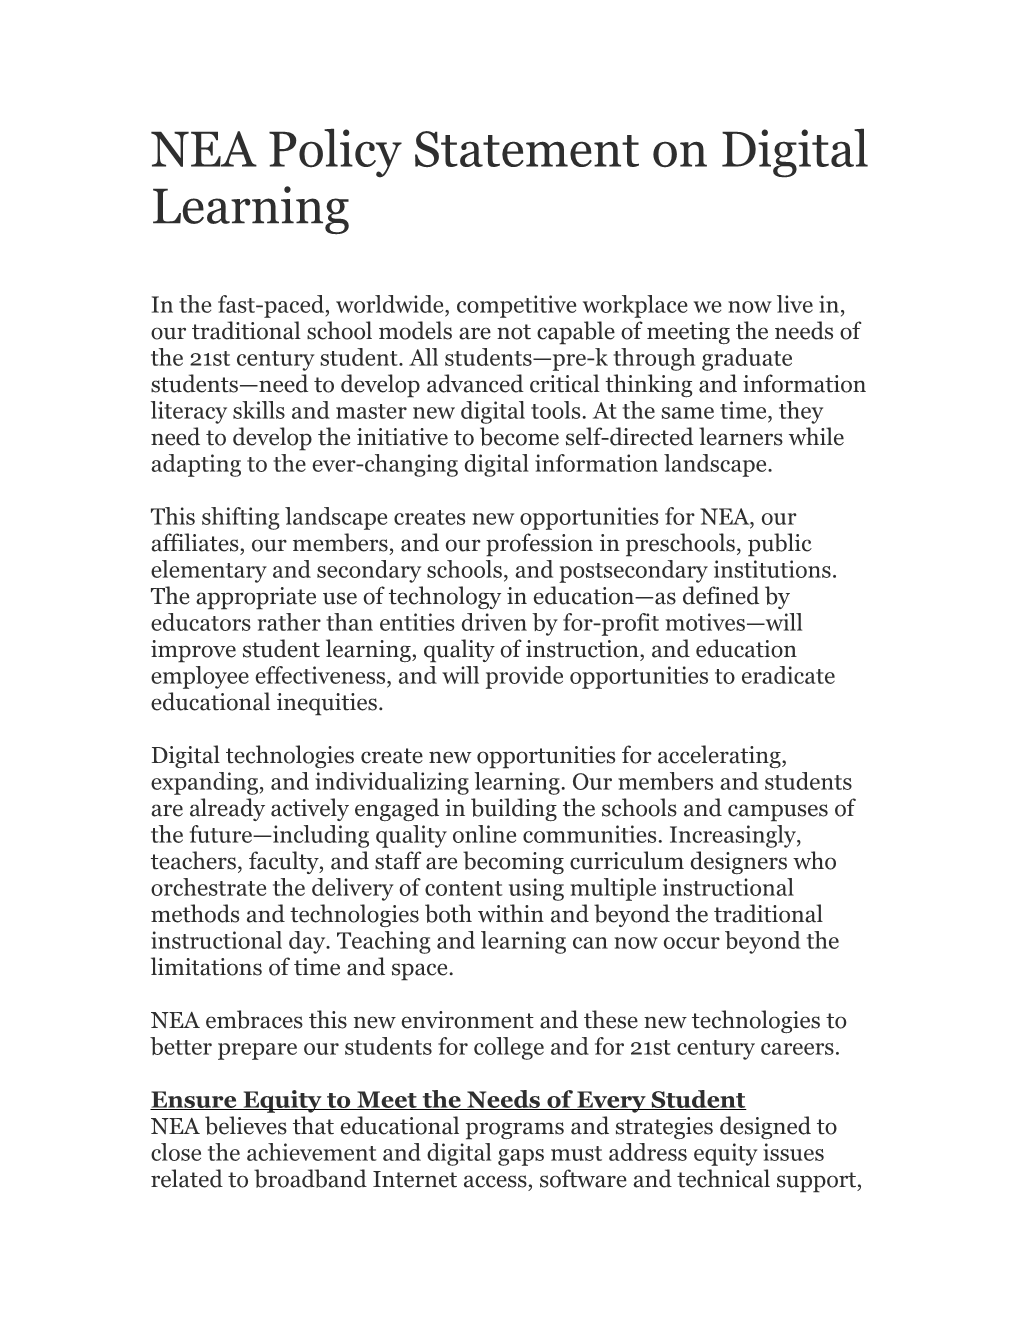 NEA Policy Statement on Digital Learning